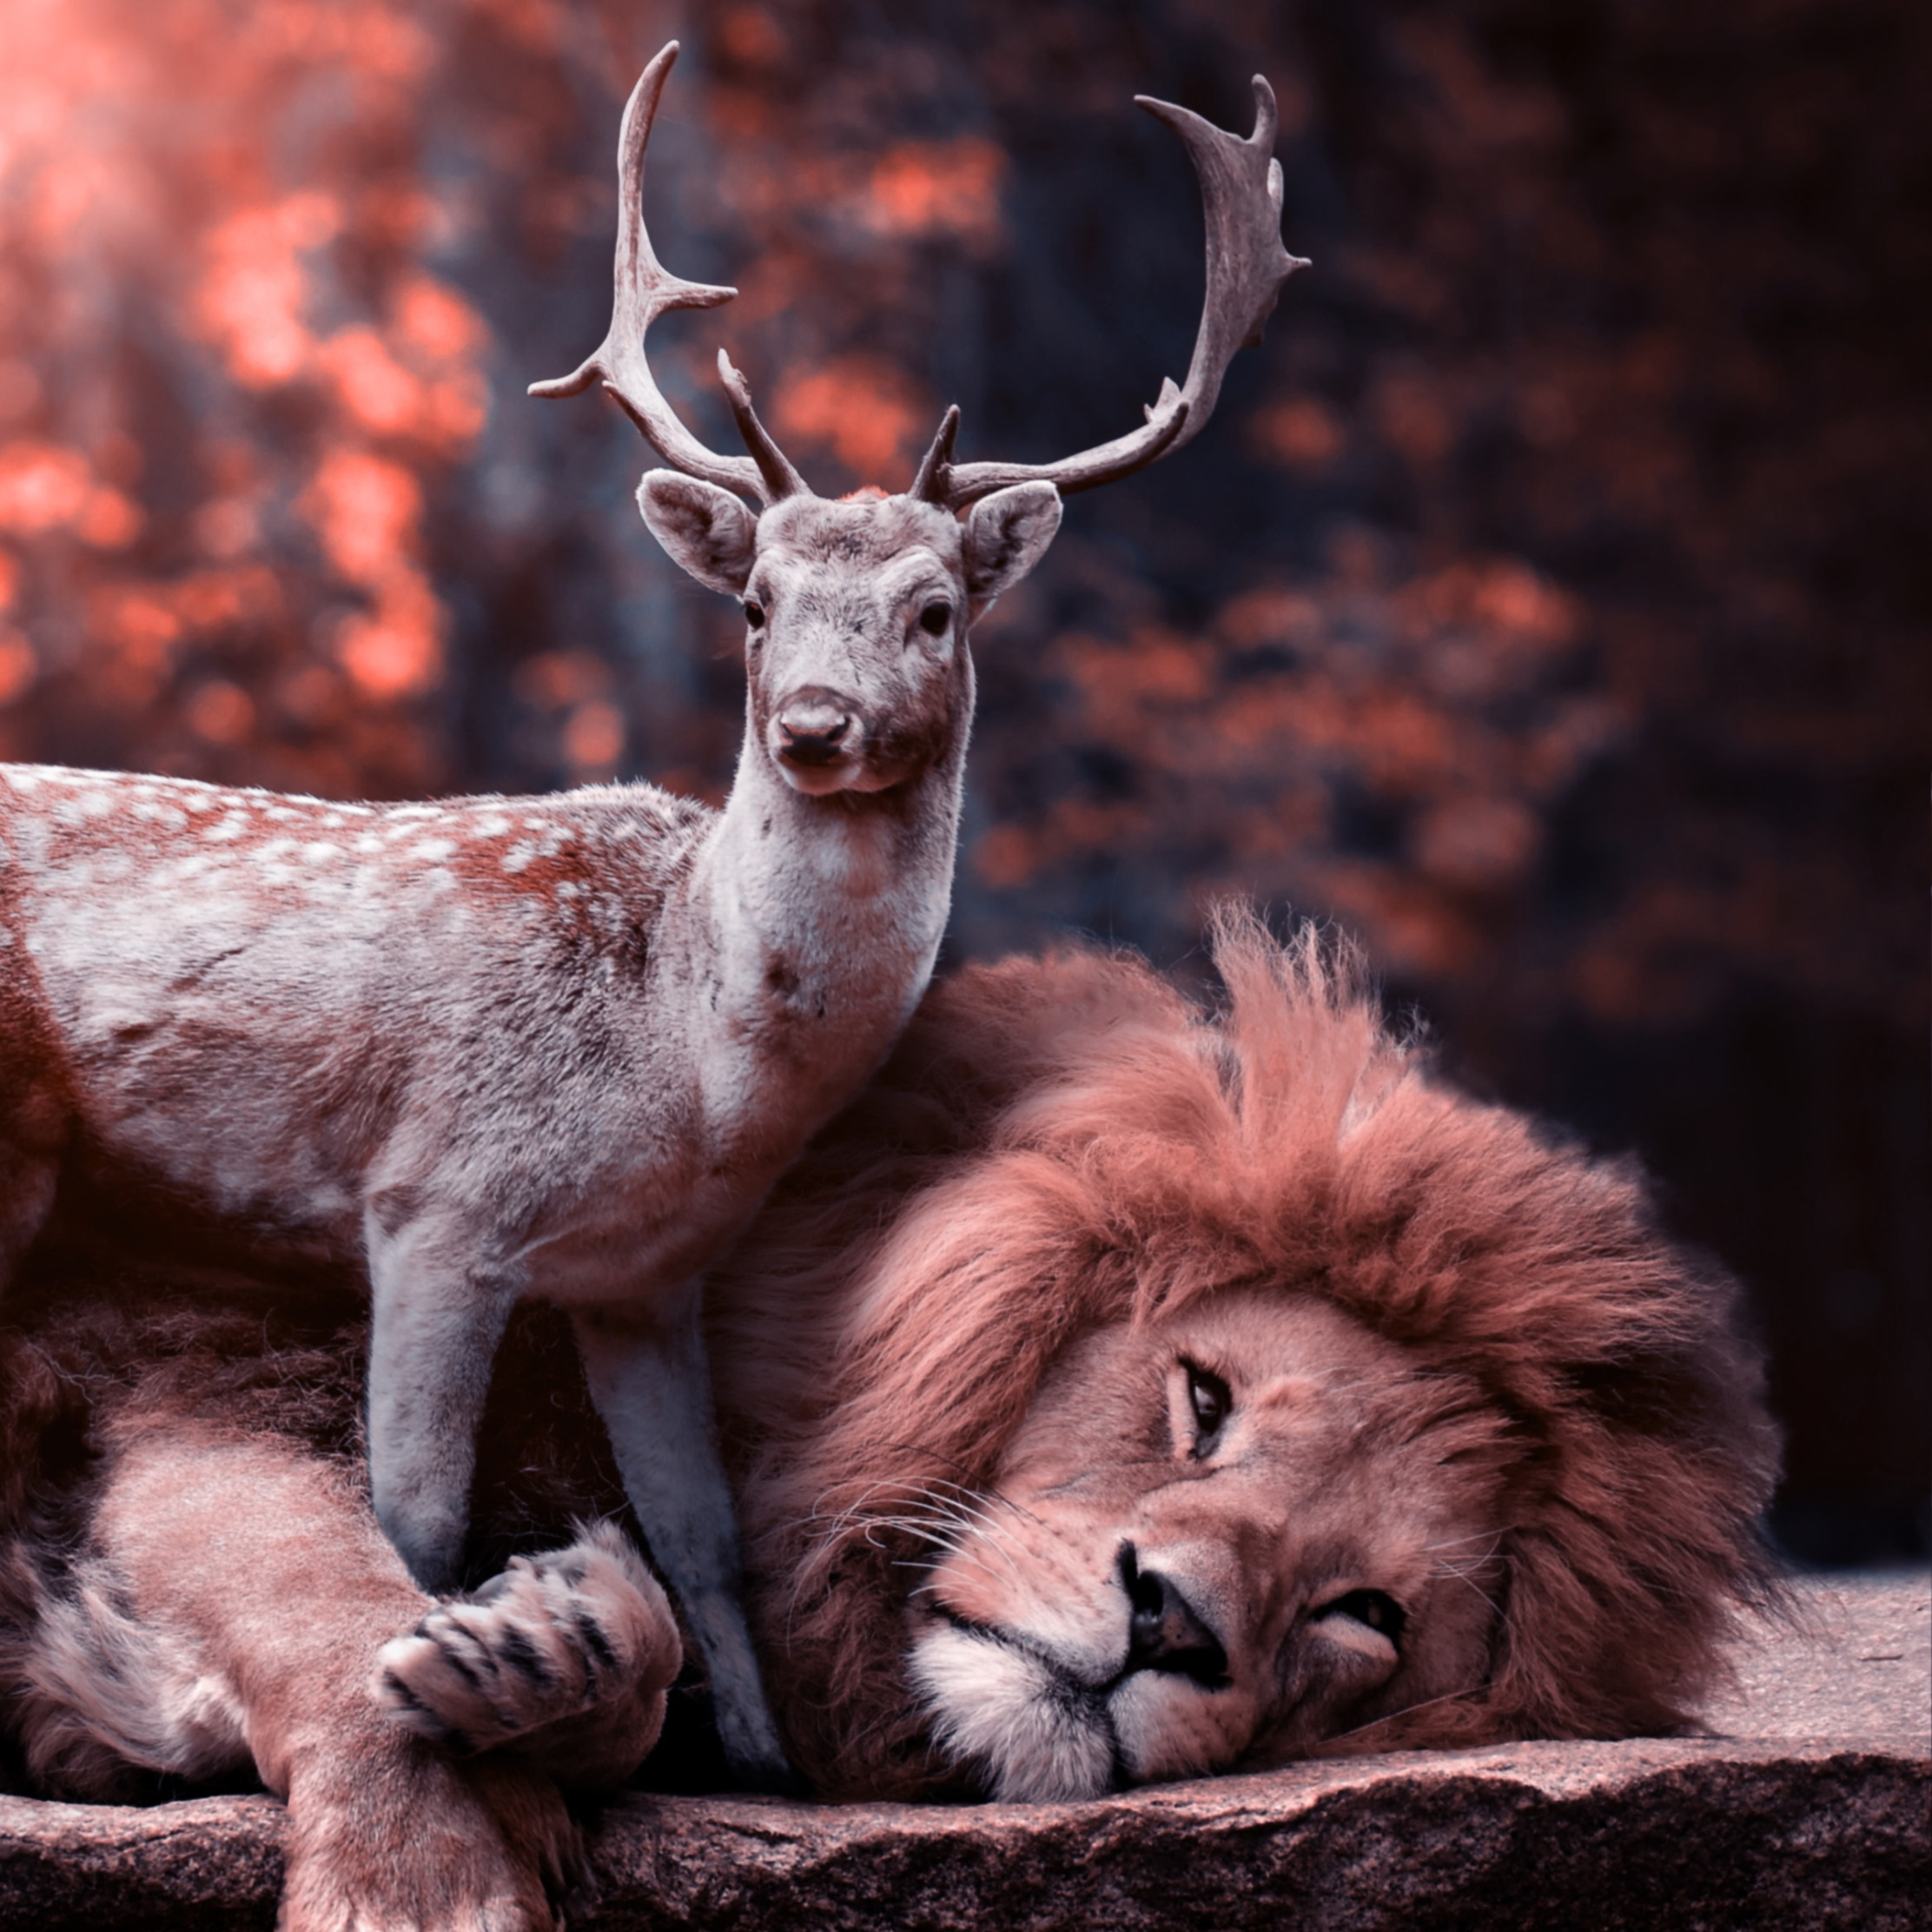 Download wallpaper: The lion and the deer 2224x2224